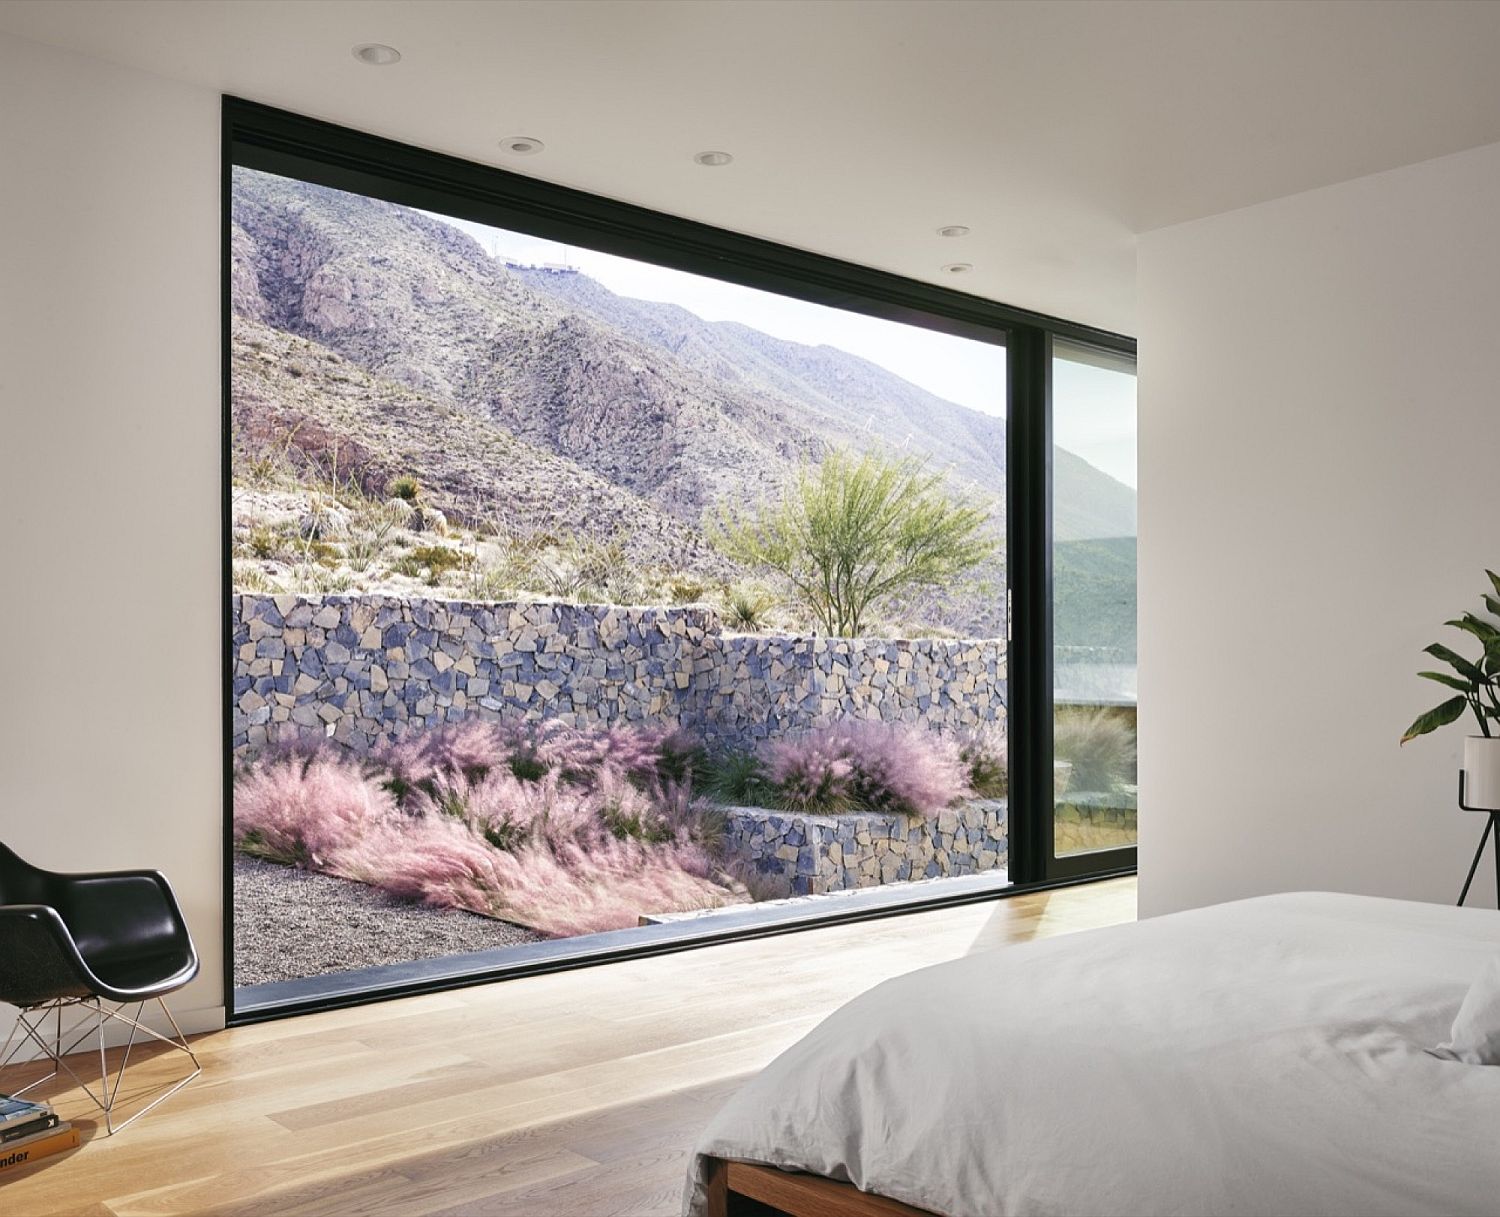 Floor-to-ceiling-window-connects-the-bedroom-with-the-rugged-mountain-landscape